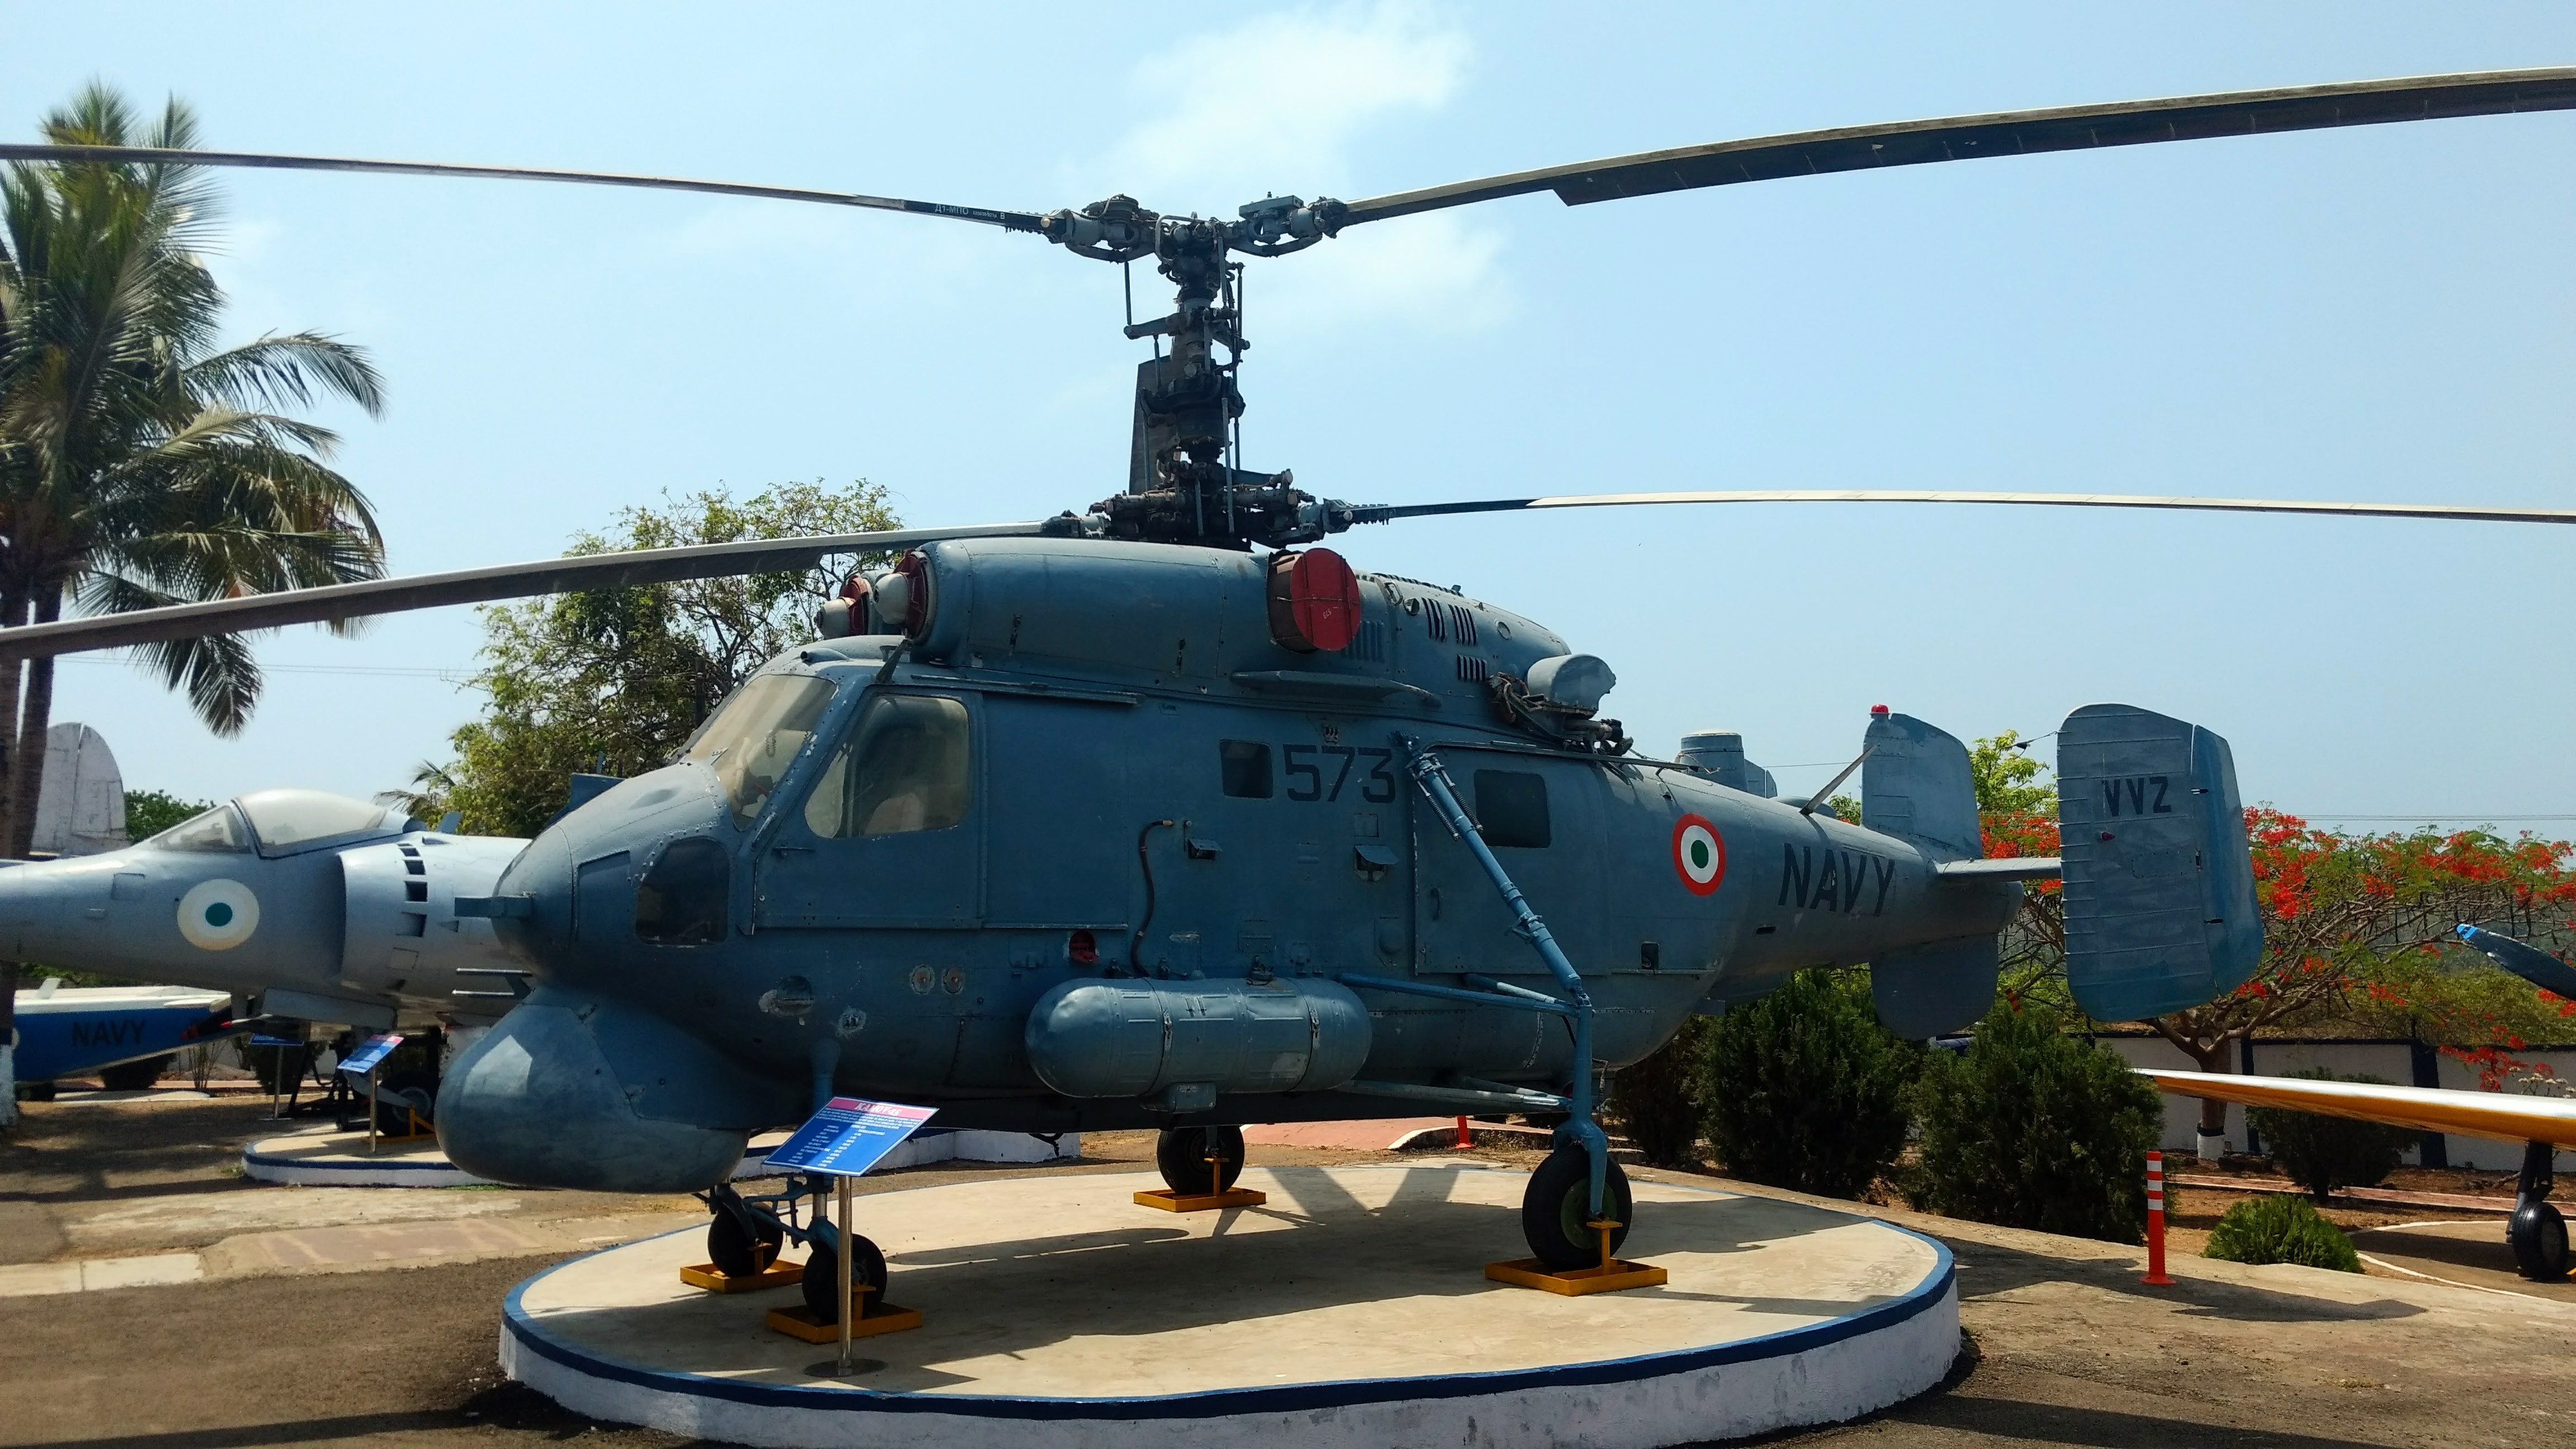 Naval Aviation Museum of Goa – Showcasing the heritage of Indian naval aviation